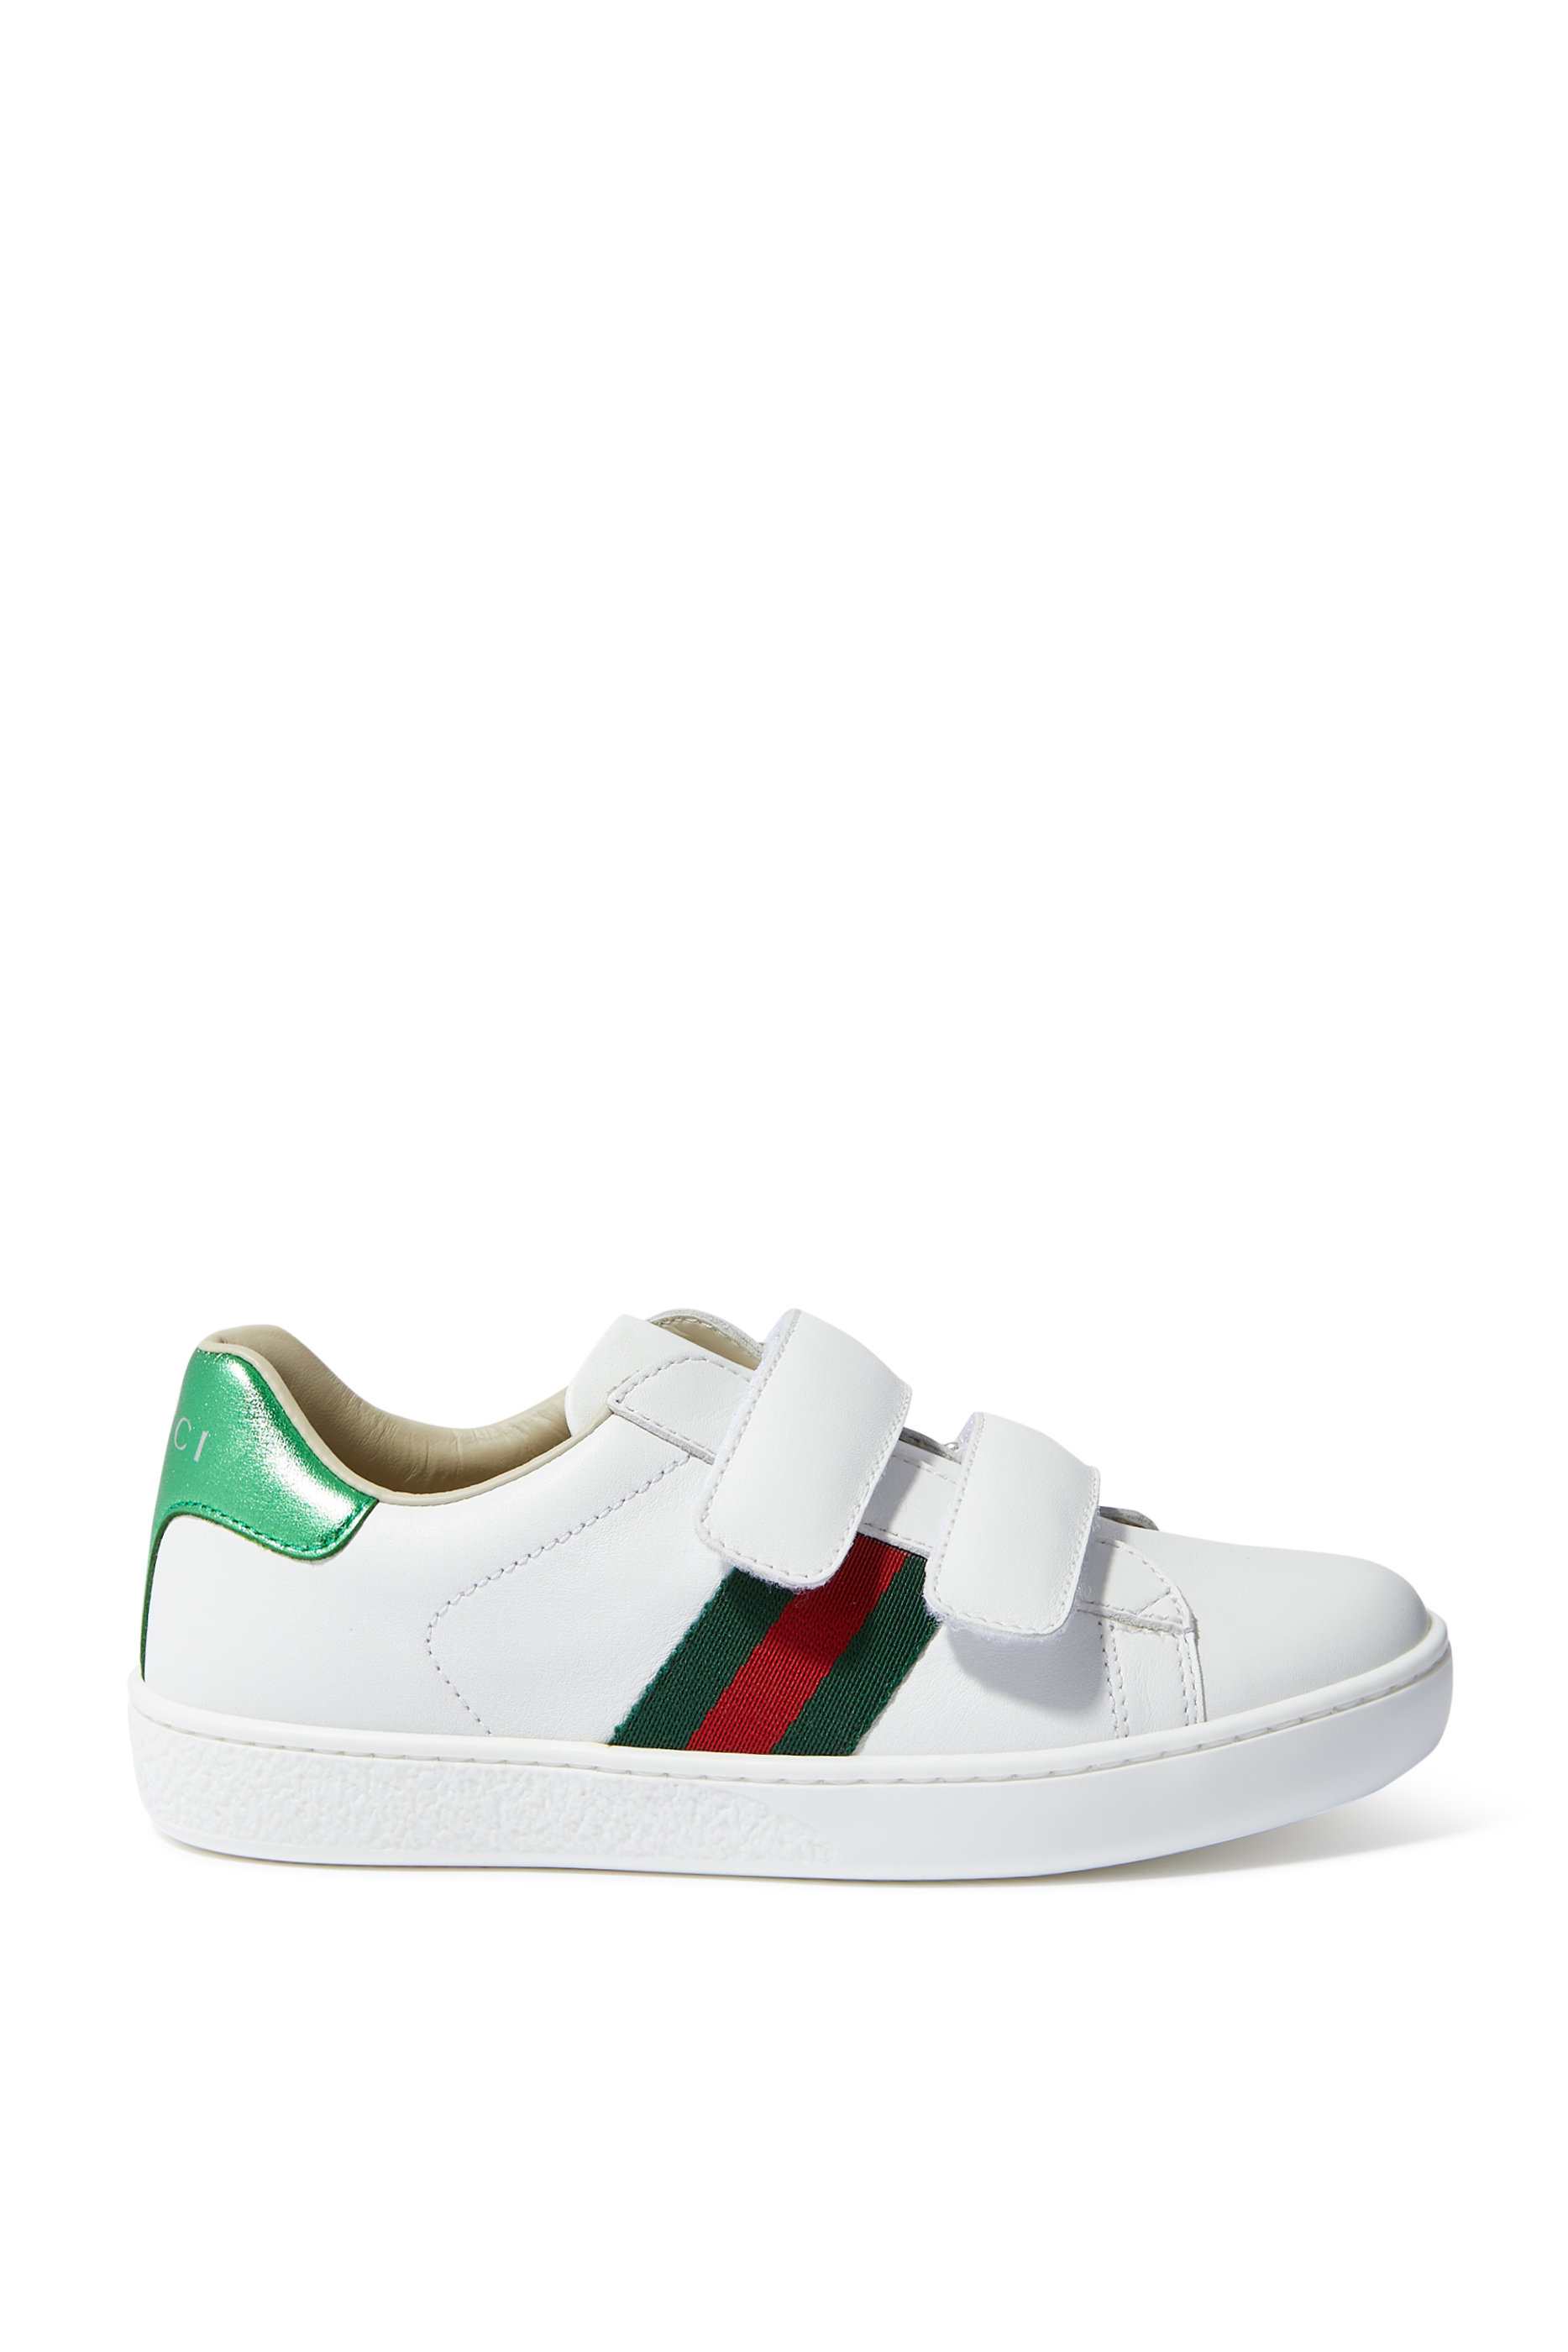 Buy Gucci Toddler Leather Sneaker With Web for Girl | Bloomingdale's UAE